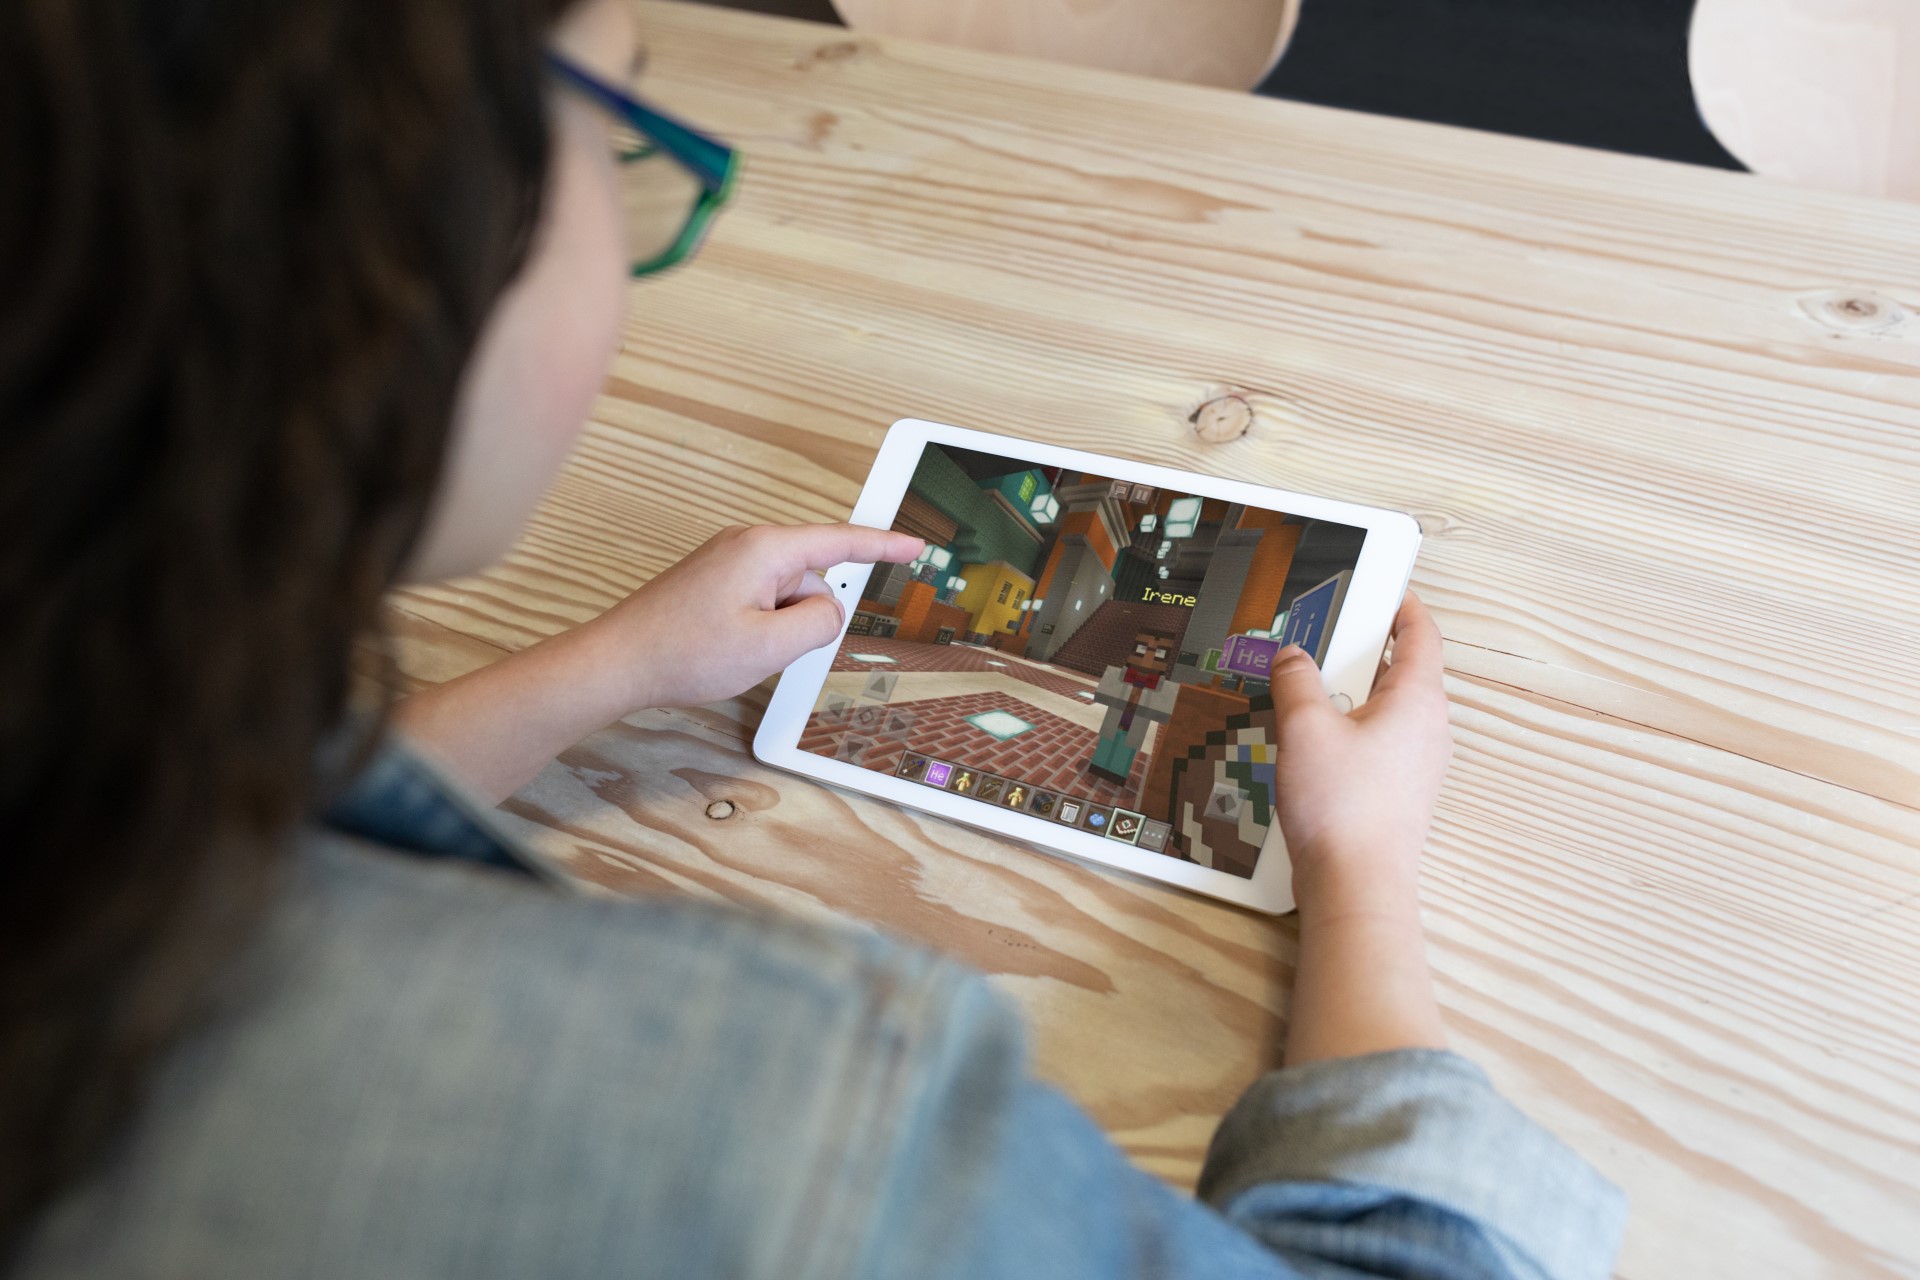 Minecraft: Education Edition is coming to the iPad next month